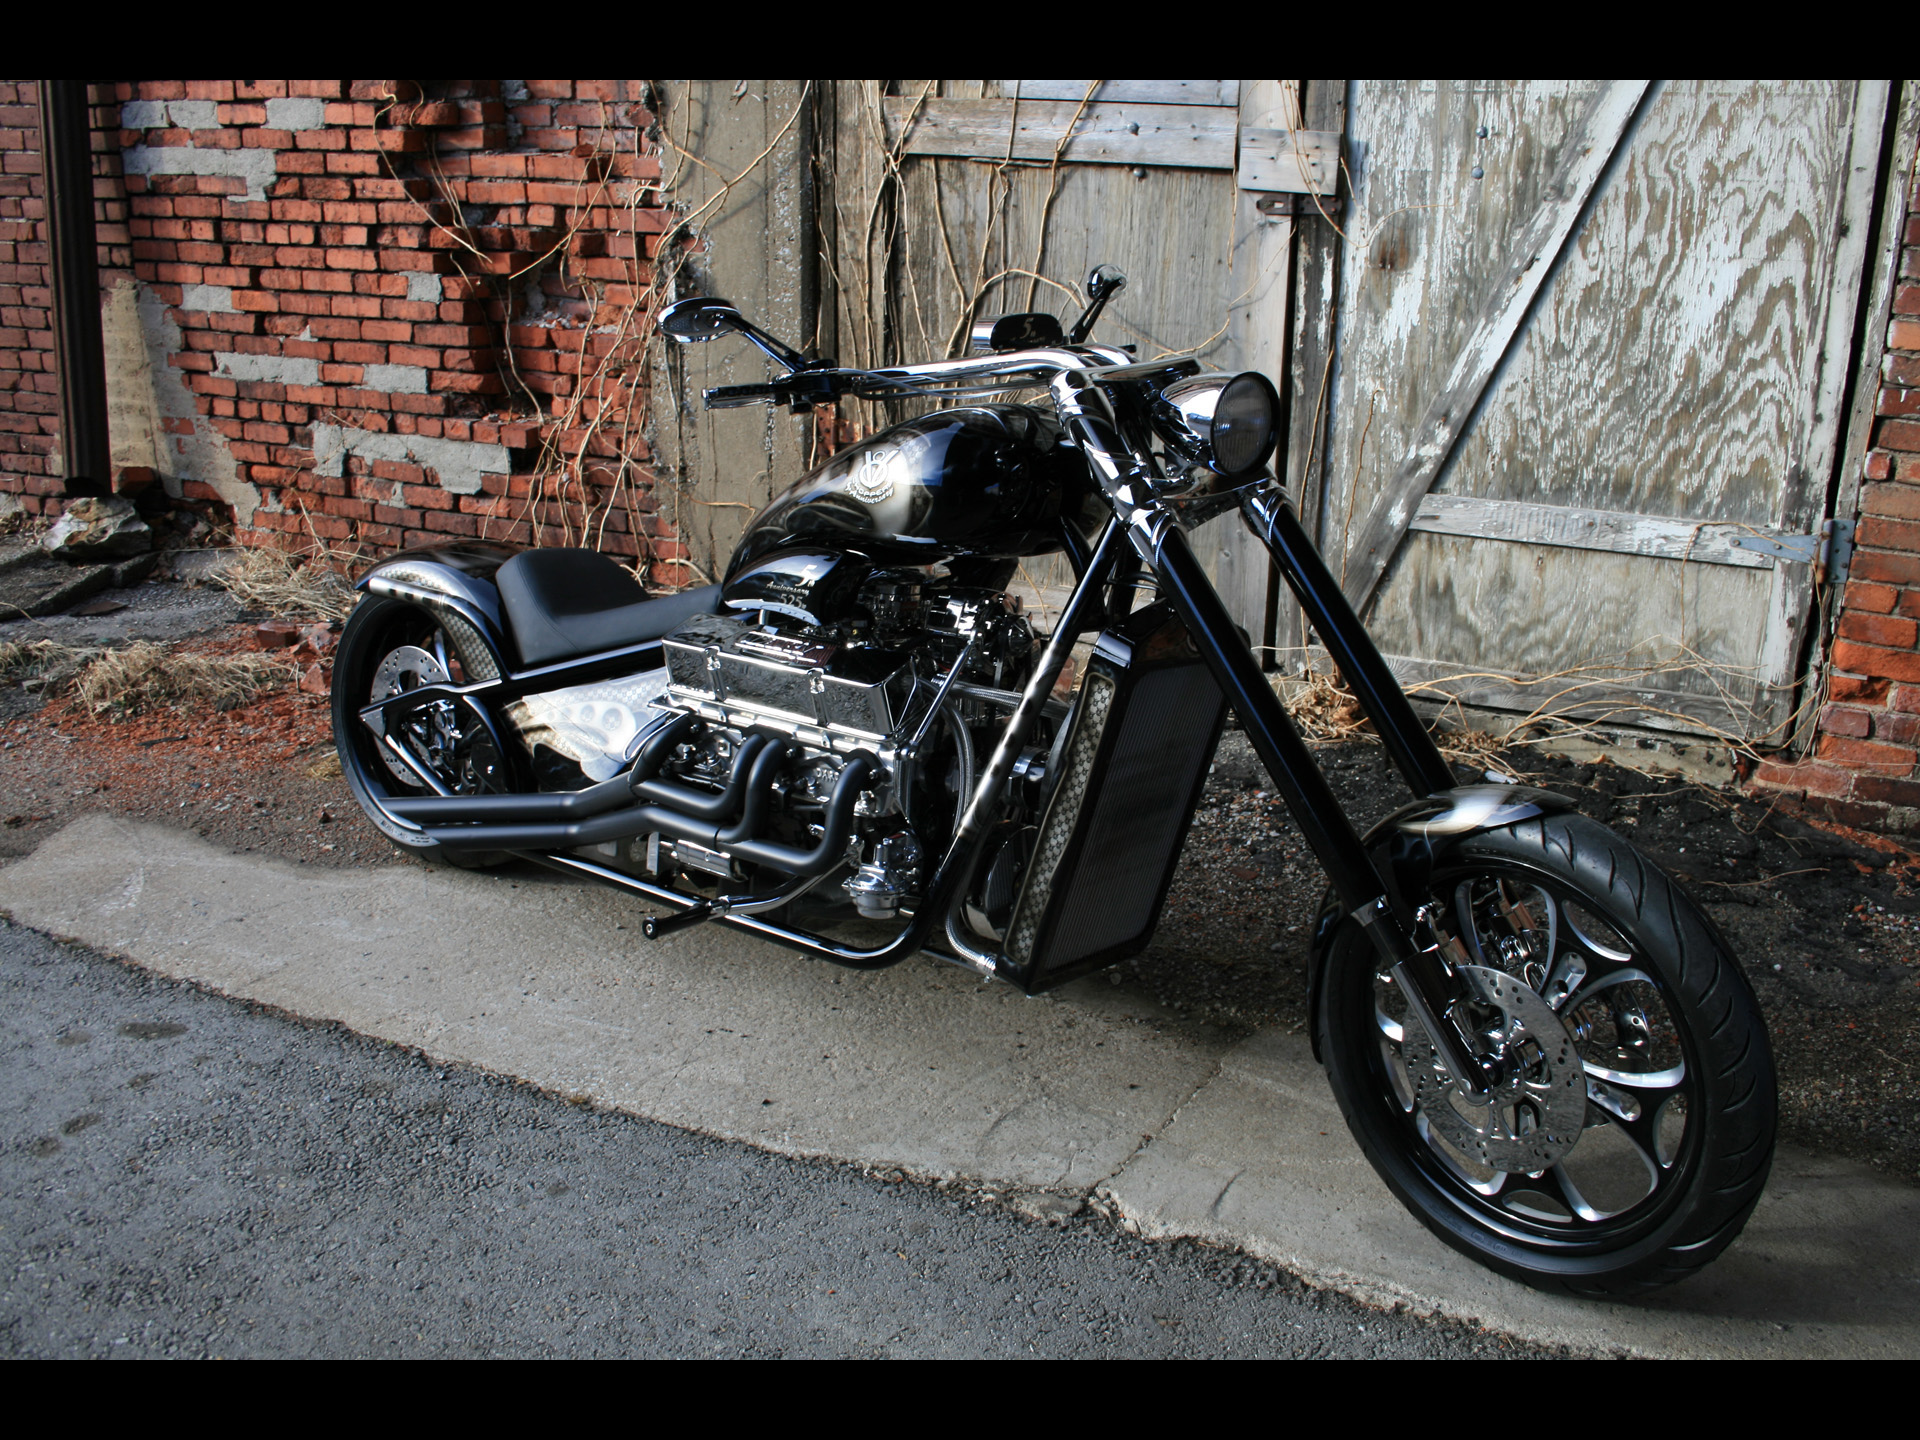 2011, V8 choppers, C series, Section, V 8, Chopper, Choppers, Engine, Engines, Muscle, Hot, Rod, Rods Wallpaper